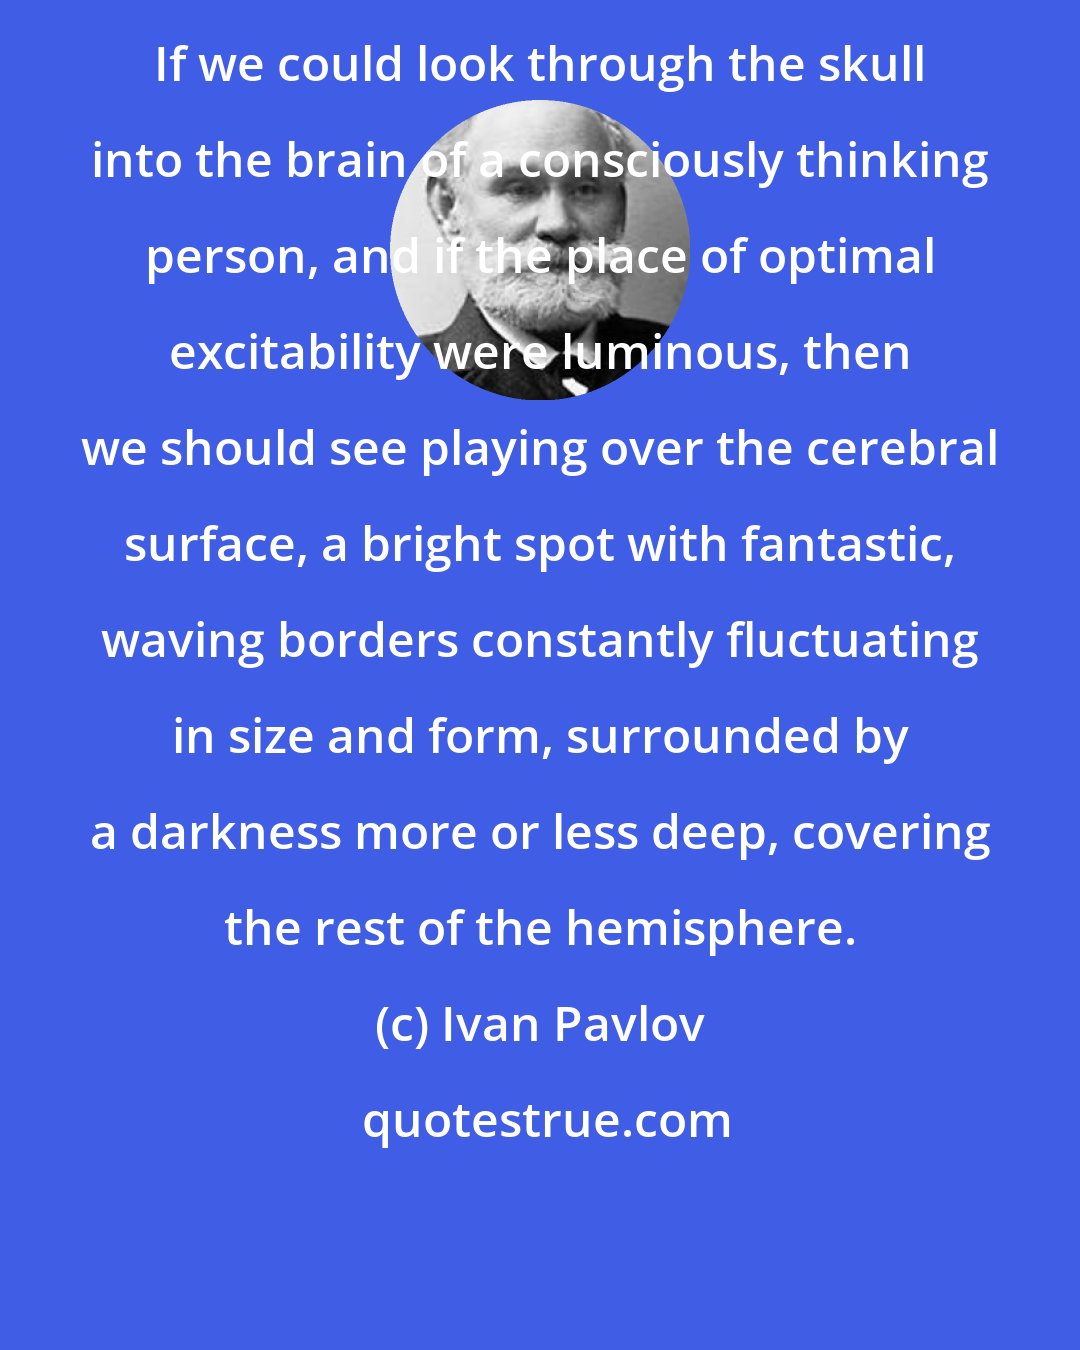 Ivan Pavlov: If we could look through the skull into the brain of a consciously thinking person, and if the place of optimal excitability were luminous, then we should see playing over the cerebral surface, a bright spot with fantastic, waving borders constantly fluctuating in size and form, surrounded by a darkness more or less deep, covering the rest of the hemisphere.